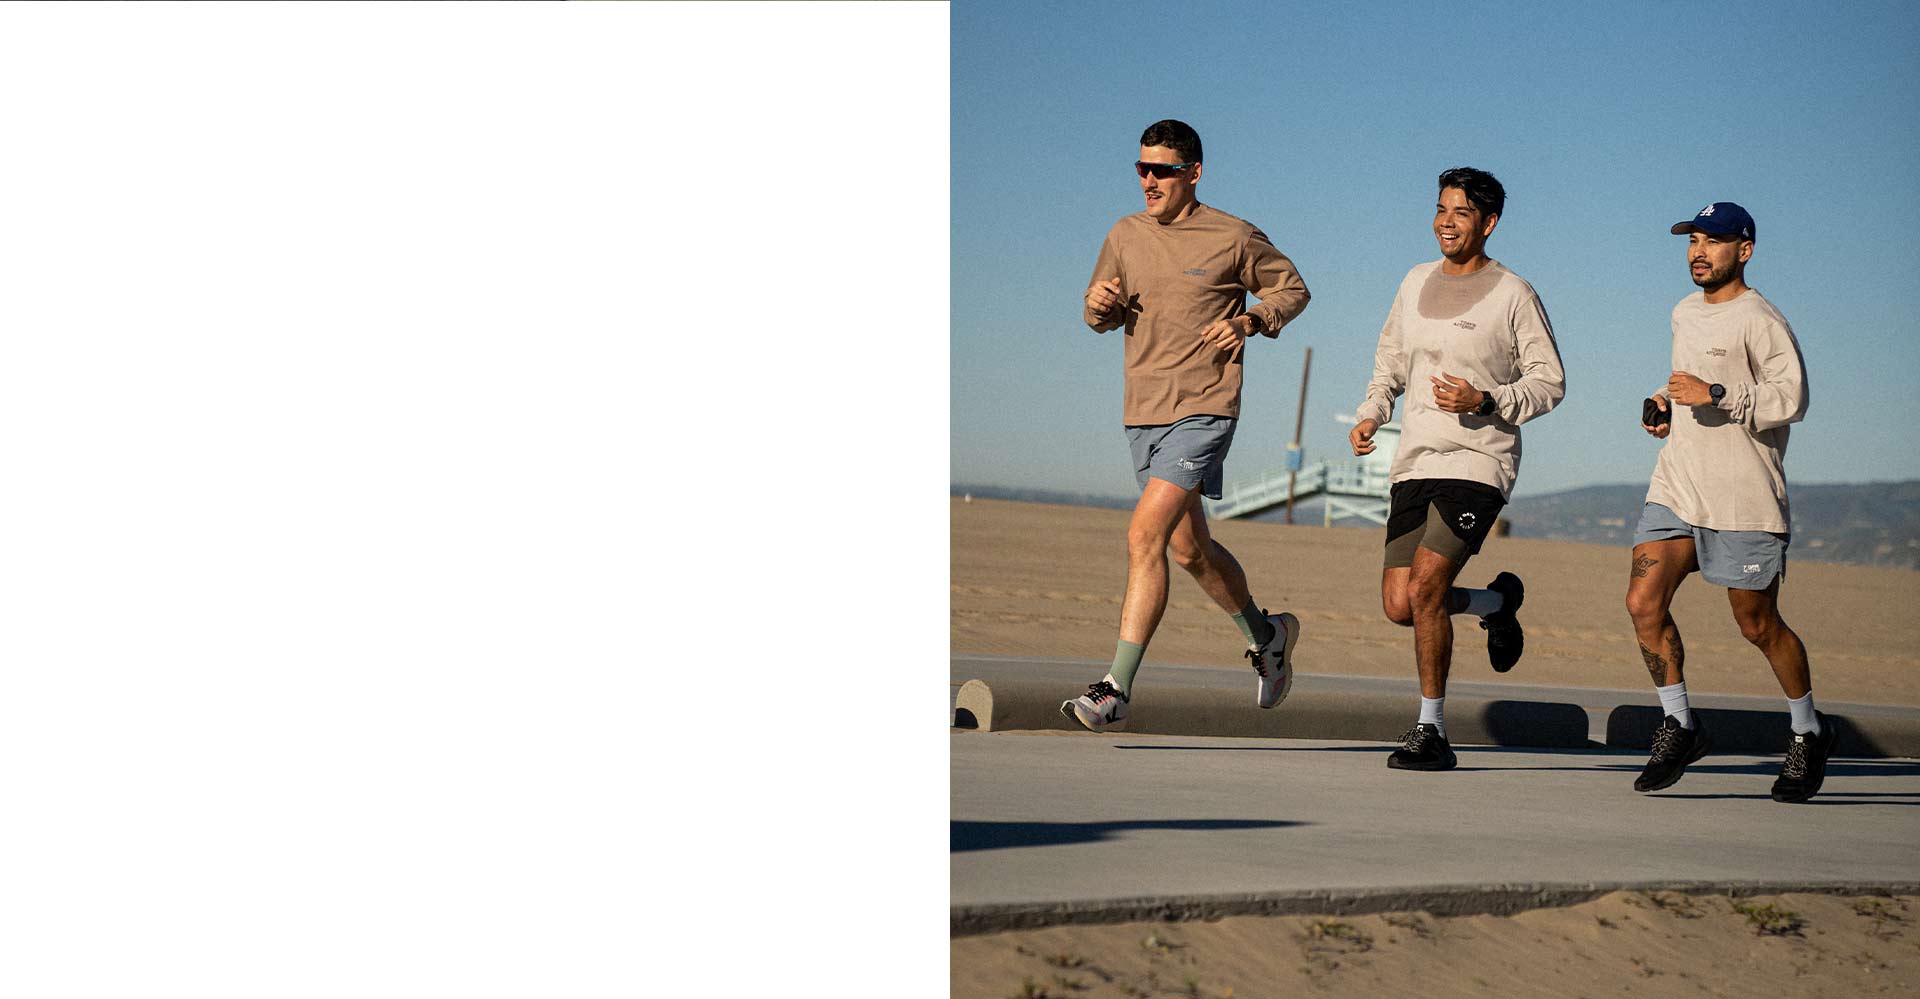 Focus on three runners of the jogging organized by VEJA in Venice Beach